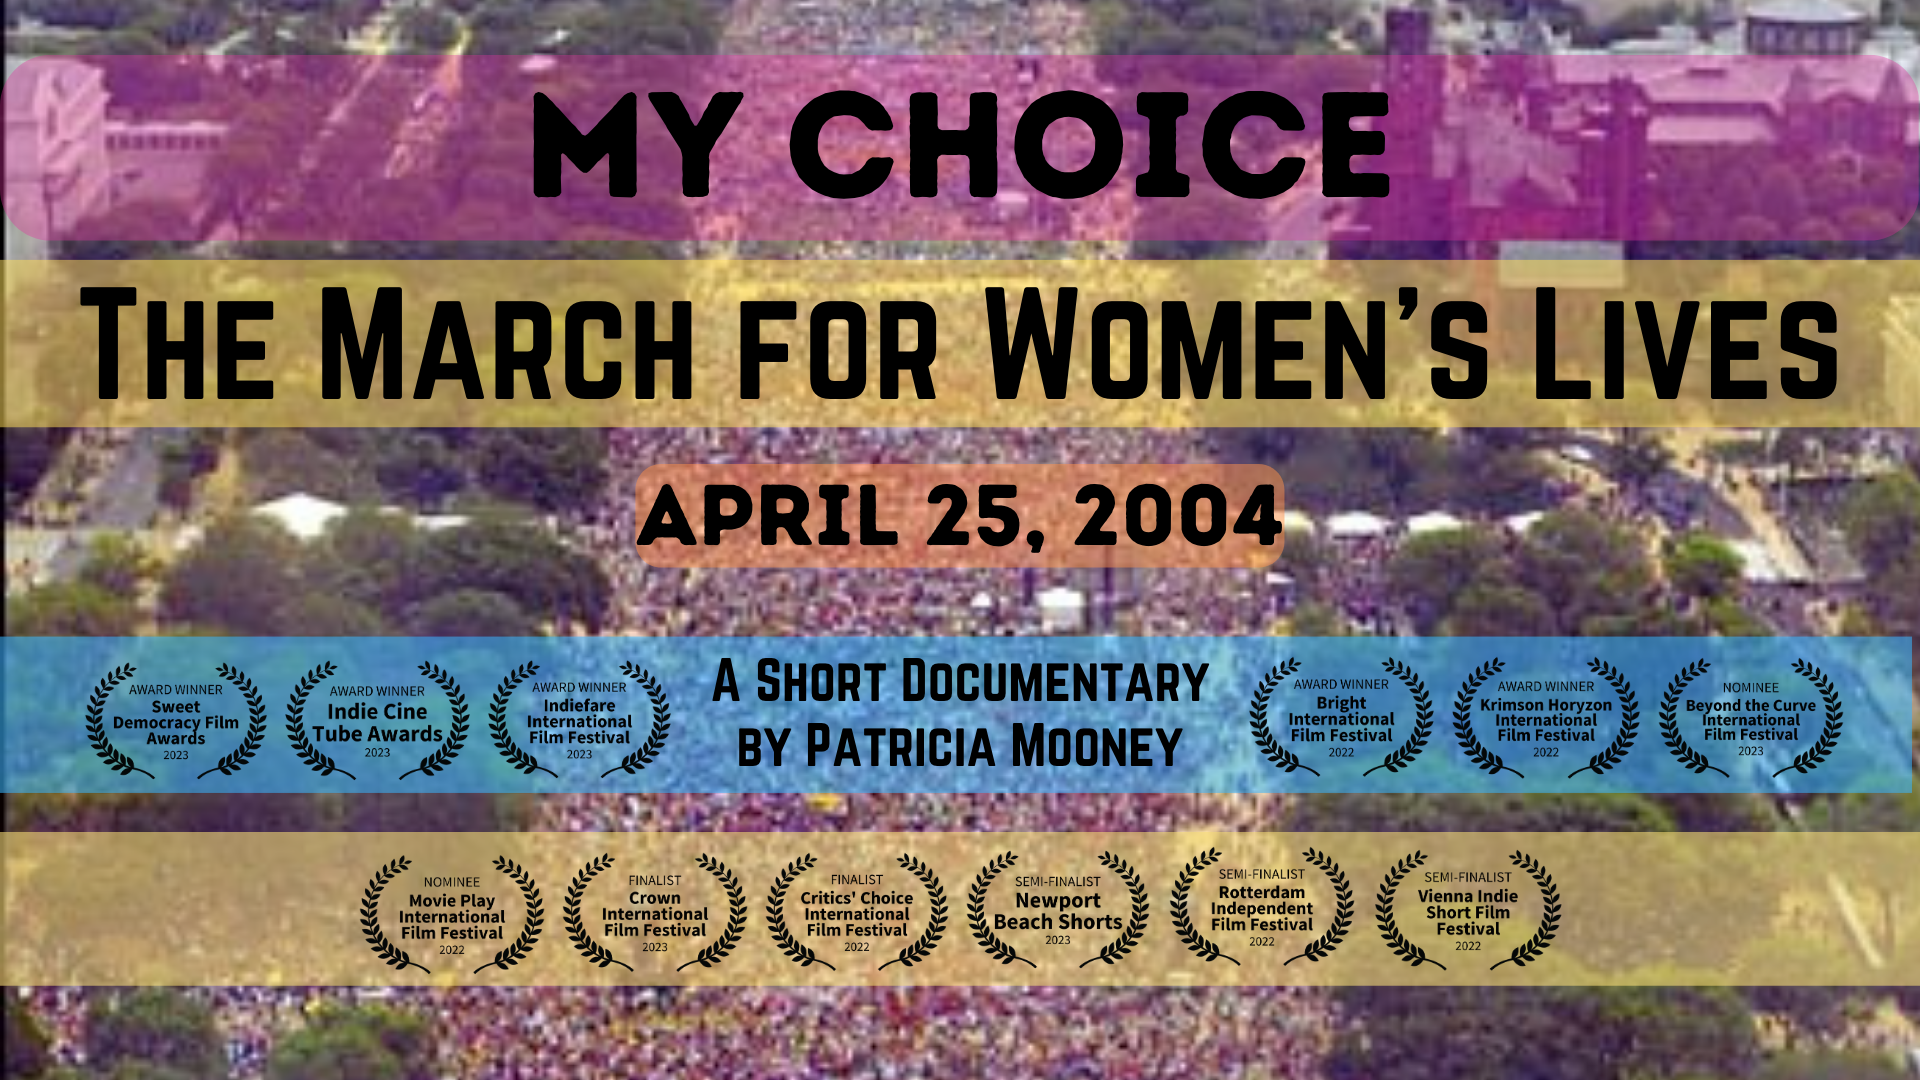 My Choice 2004 March for Women's Lives Multi-Award-Winning Documentary